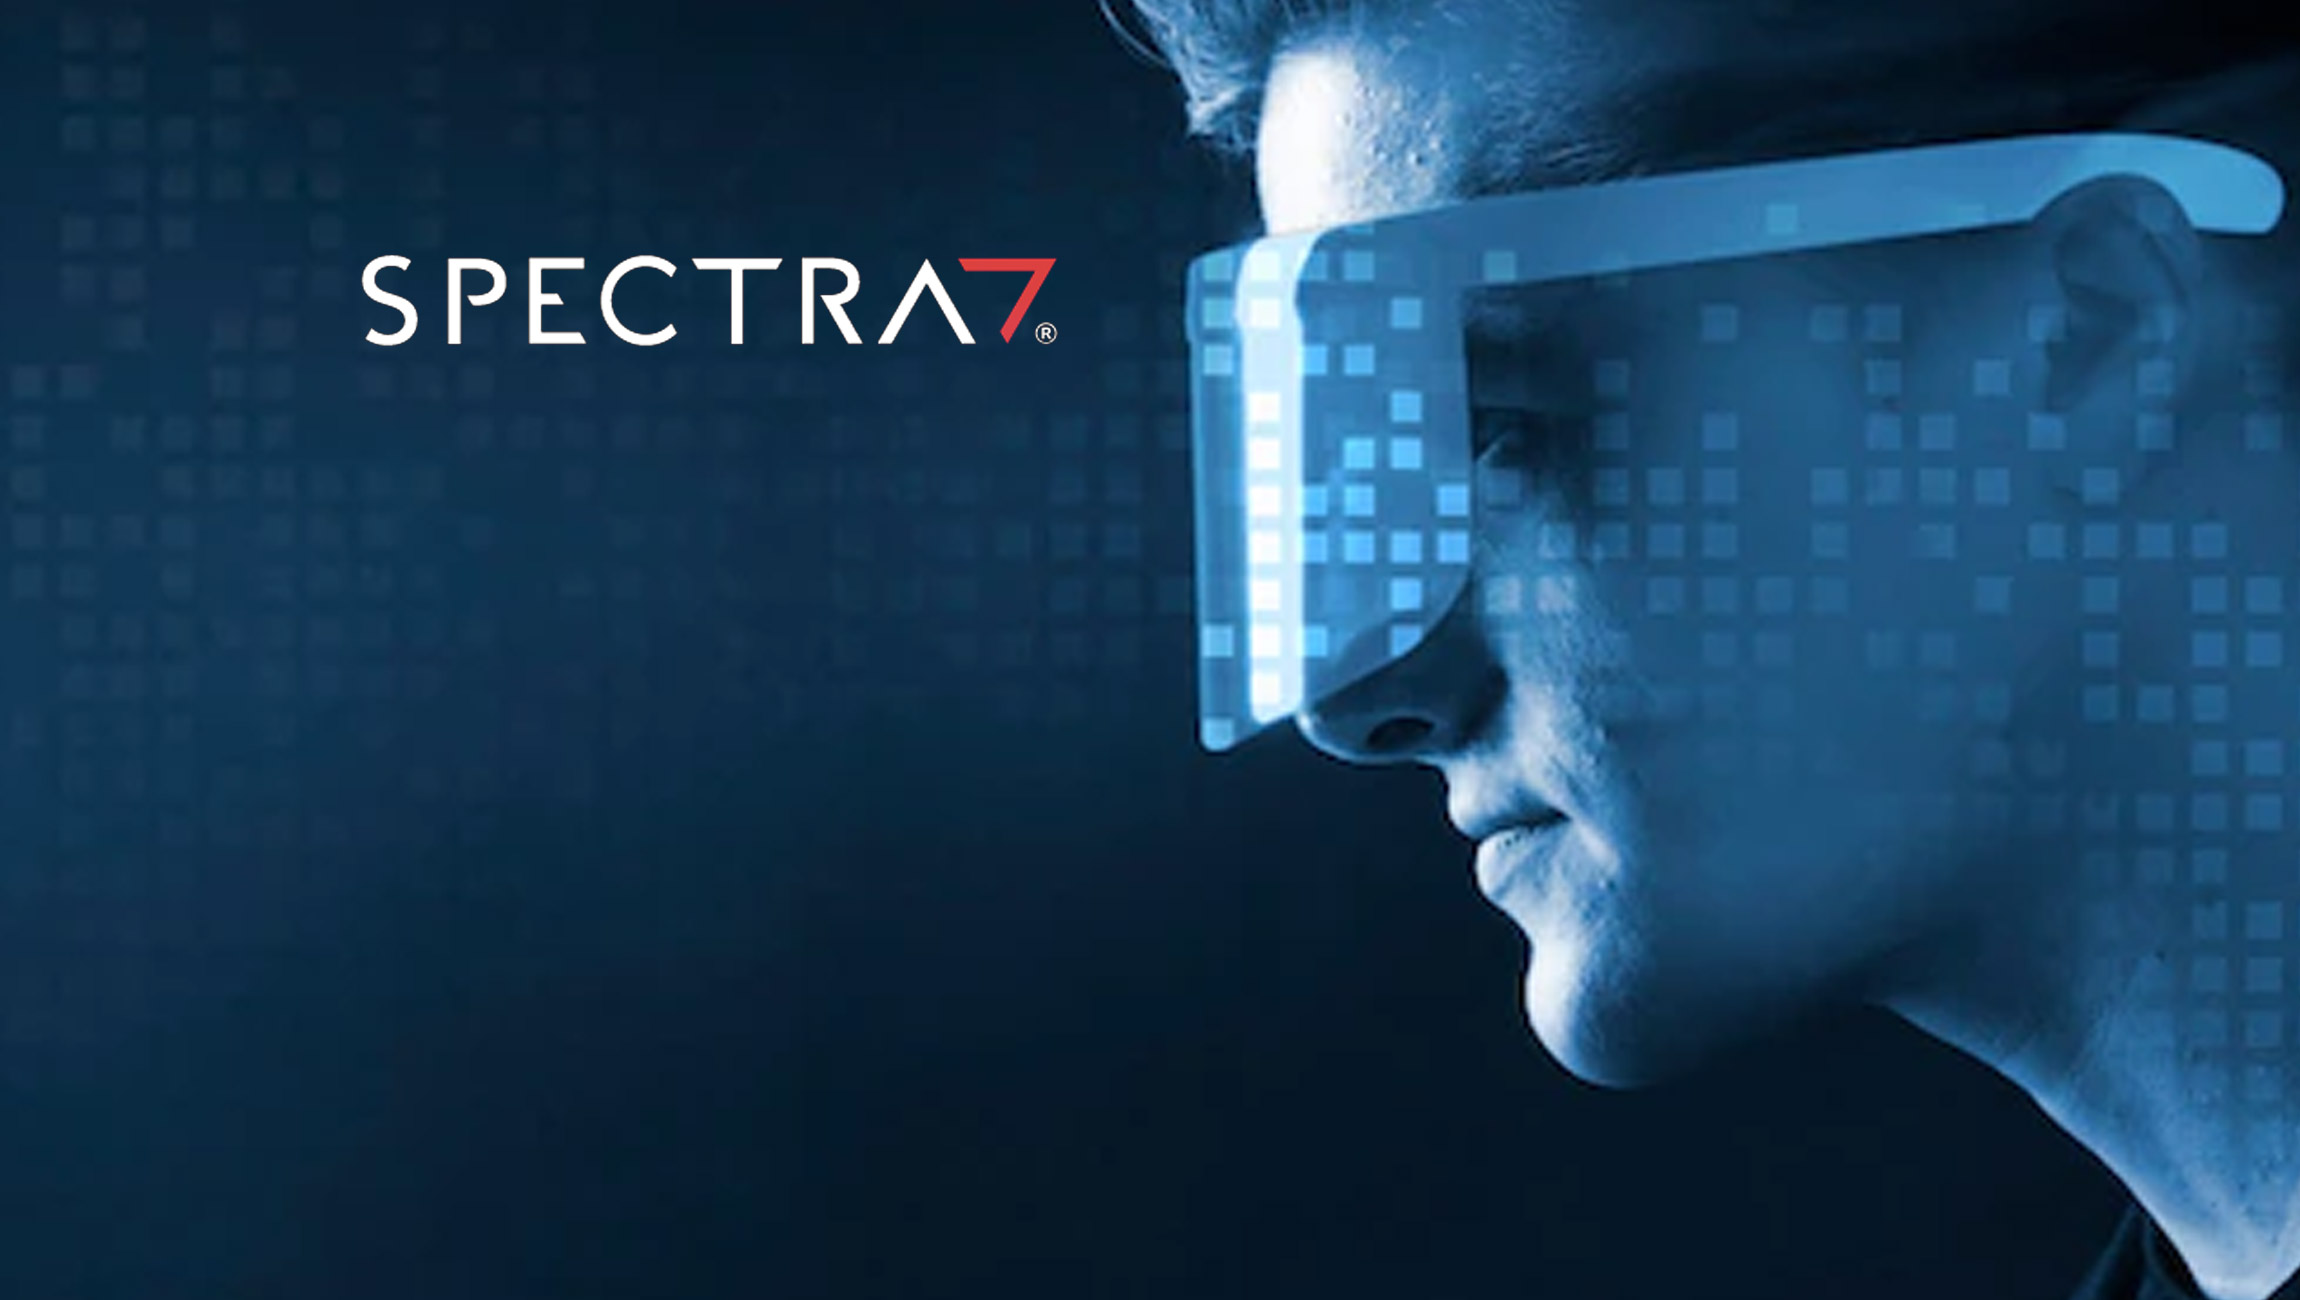 Top-Global-Virtual-Reality-Gaming-Company-Chooses-Spectra7-Chipset-to-Power-its-Next-Generation-Head-Mounted-Display